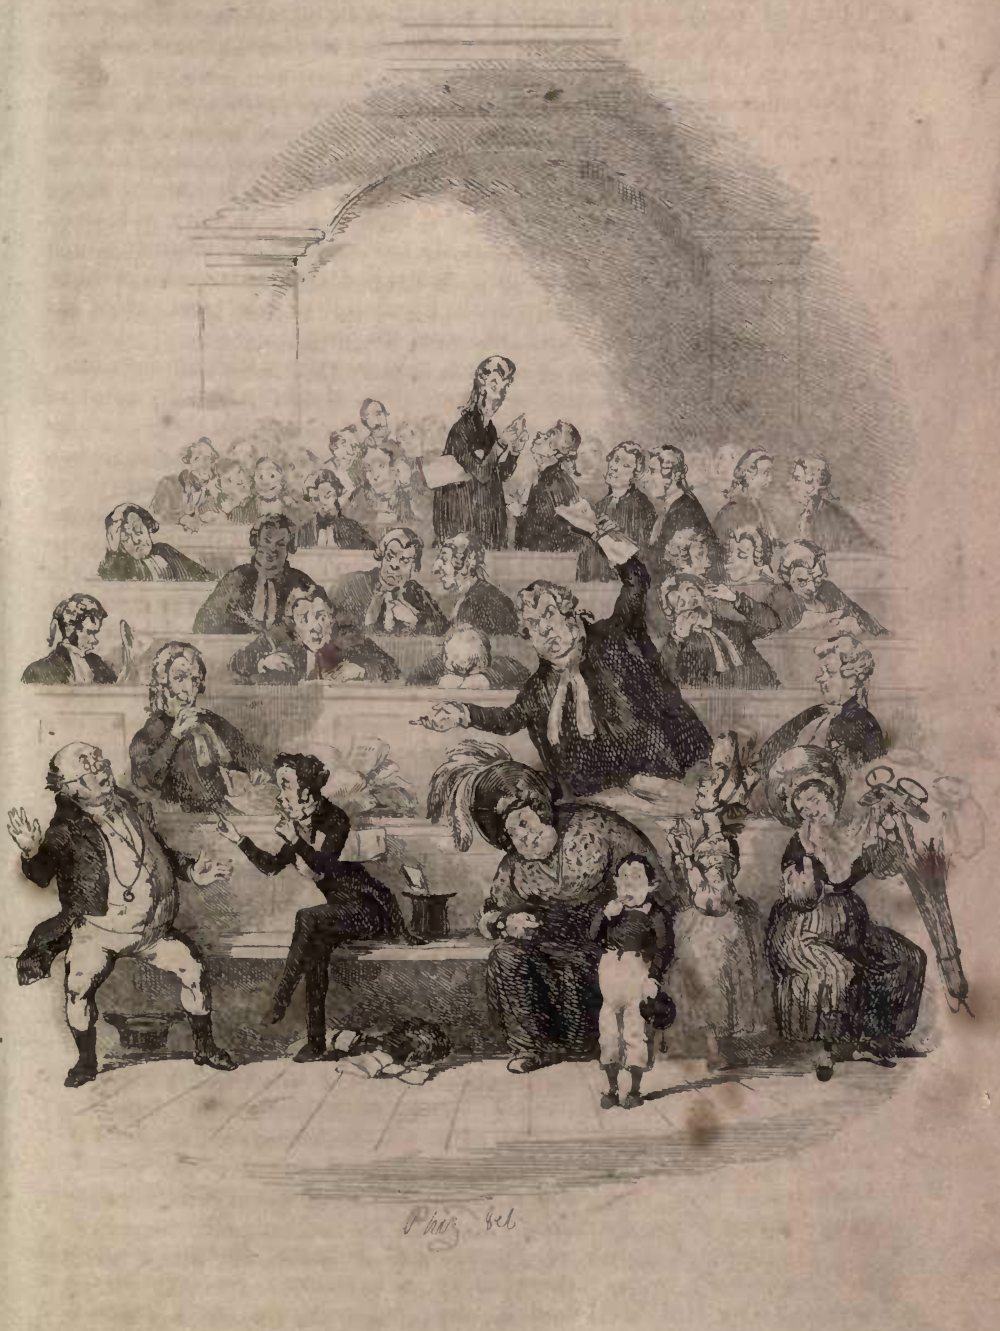 In court